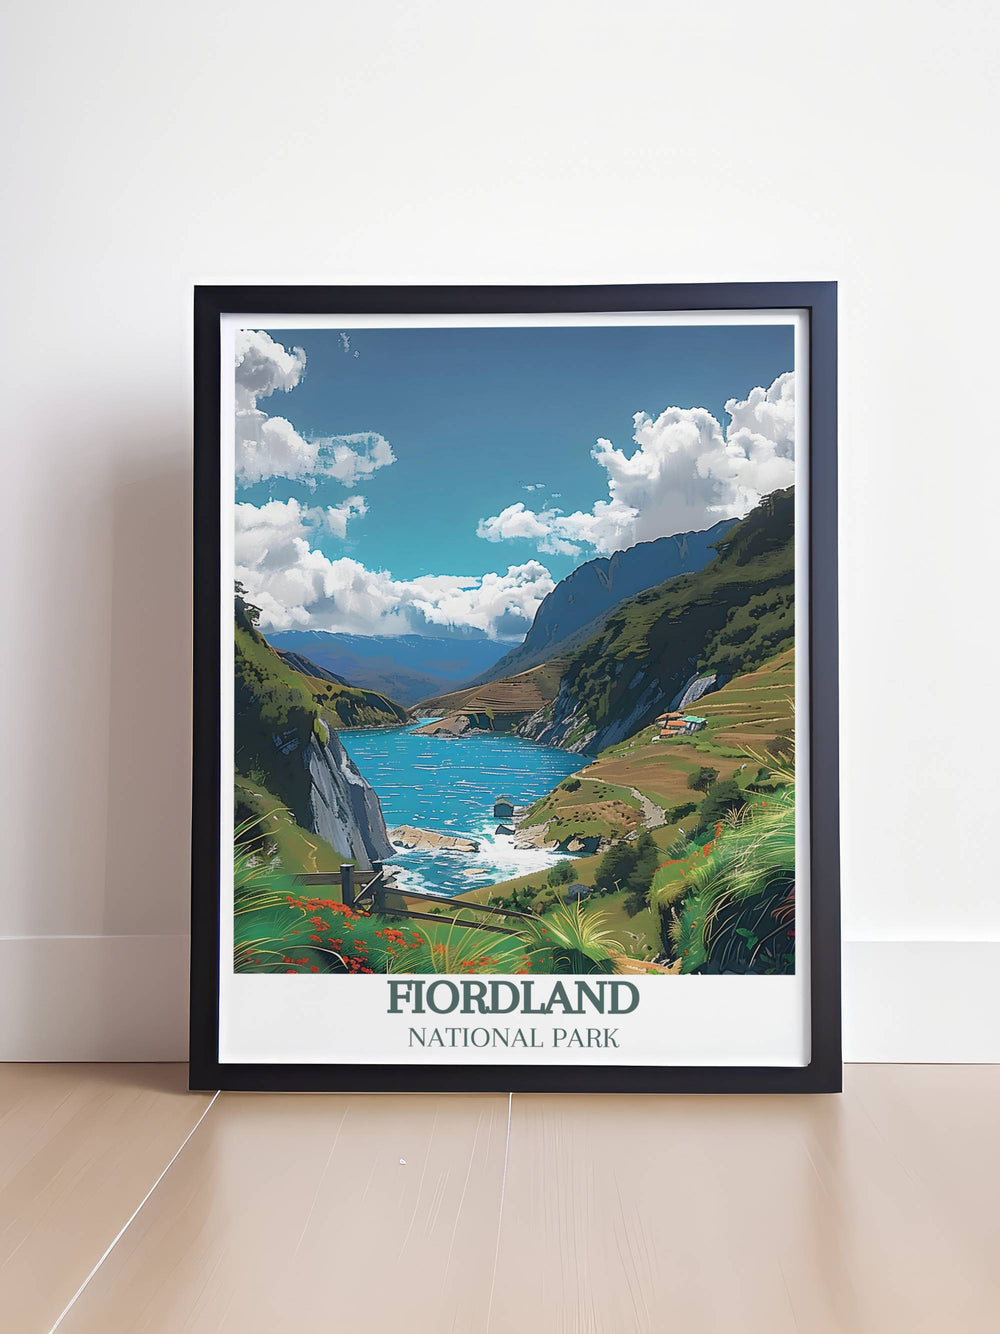 Sunrise over The Routeburn Track illuminating the peaks and valleys in warm golden tones, beautifully rendered in a high quality wall art piece.